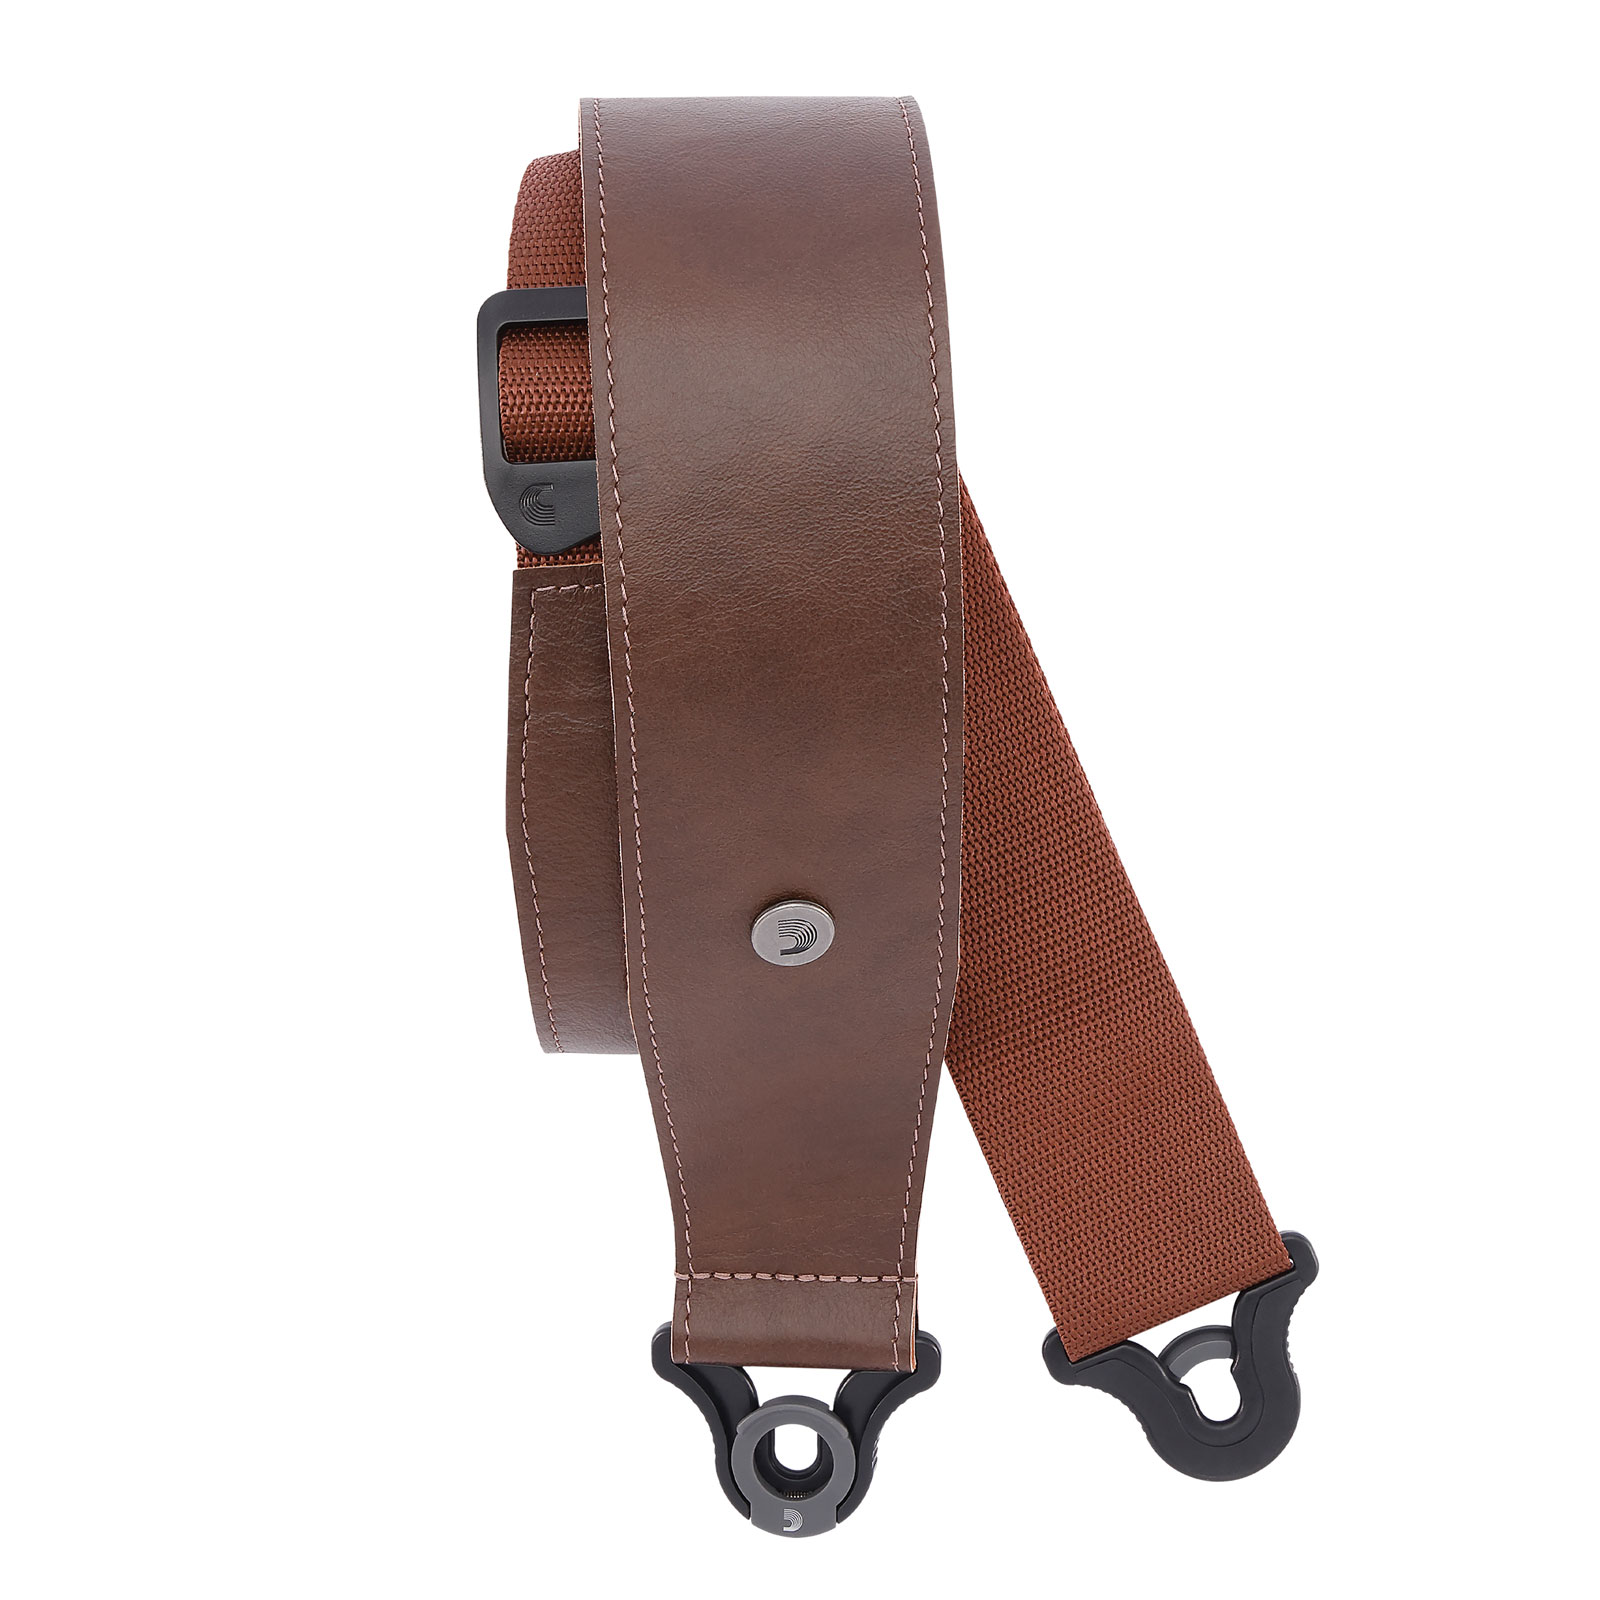 D'ADDARIO AND CO COMFORT LEATHER AUTO LOCK GUITAR STRAP, BROWN